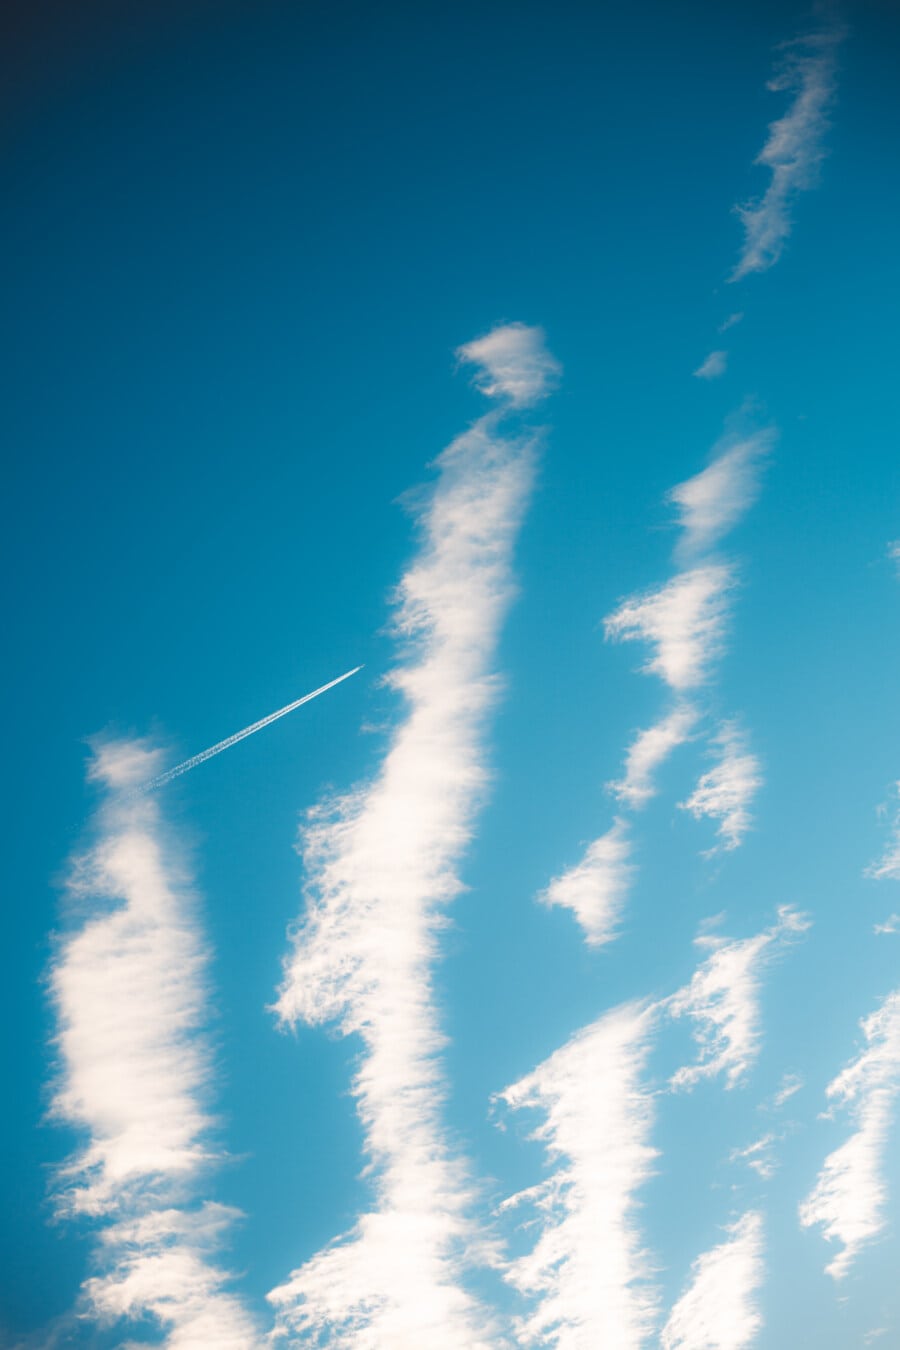 clouds, blue sky, ozone, climate, weather, light, cloudy, air, cloud, atmosphere